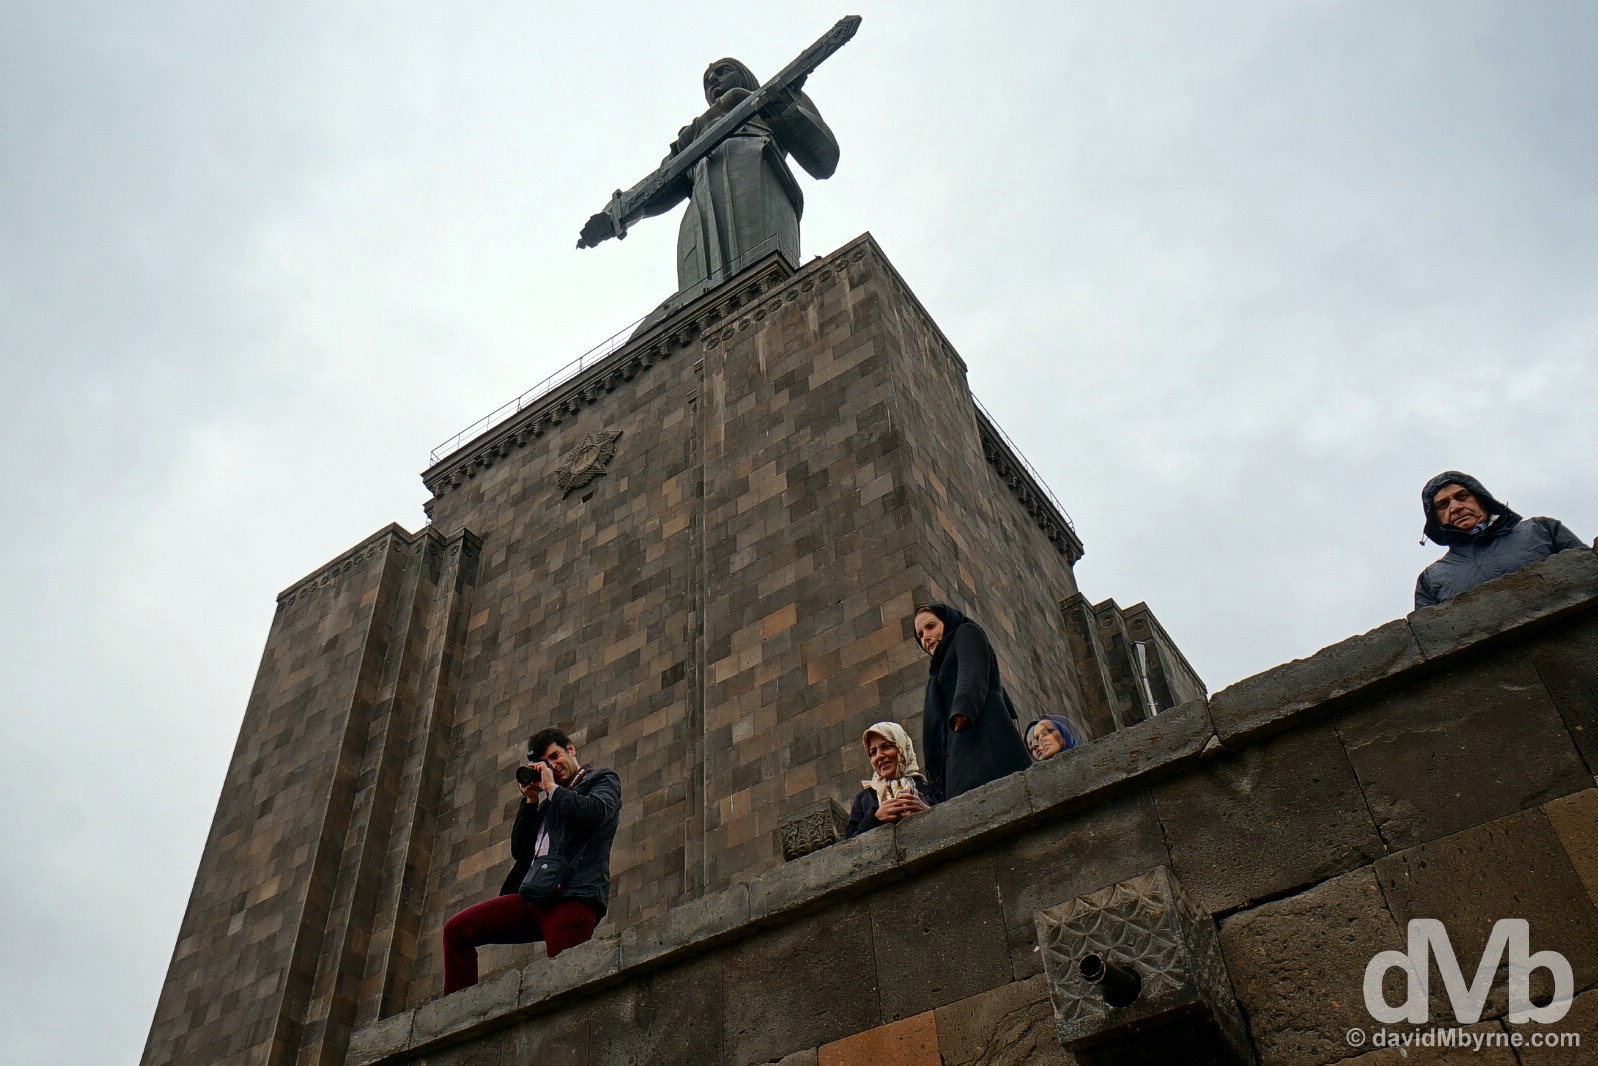 At the base of the 51-metre high Mayr Hayastan (Mother Armenia) overlooking Yerevan, Armenia. March 24, 2015.